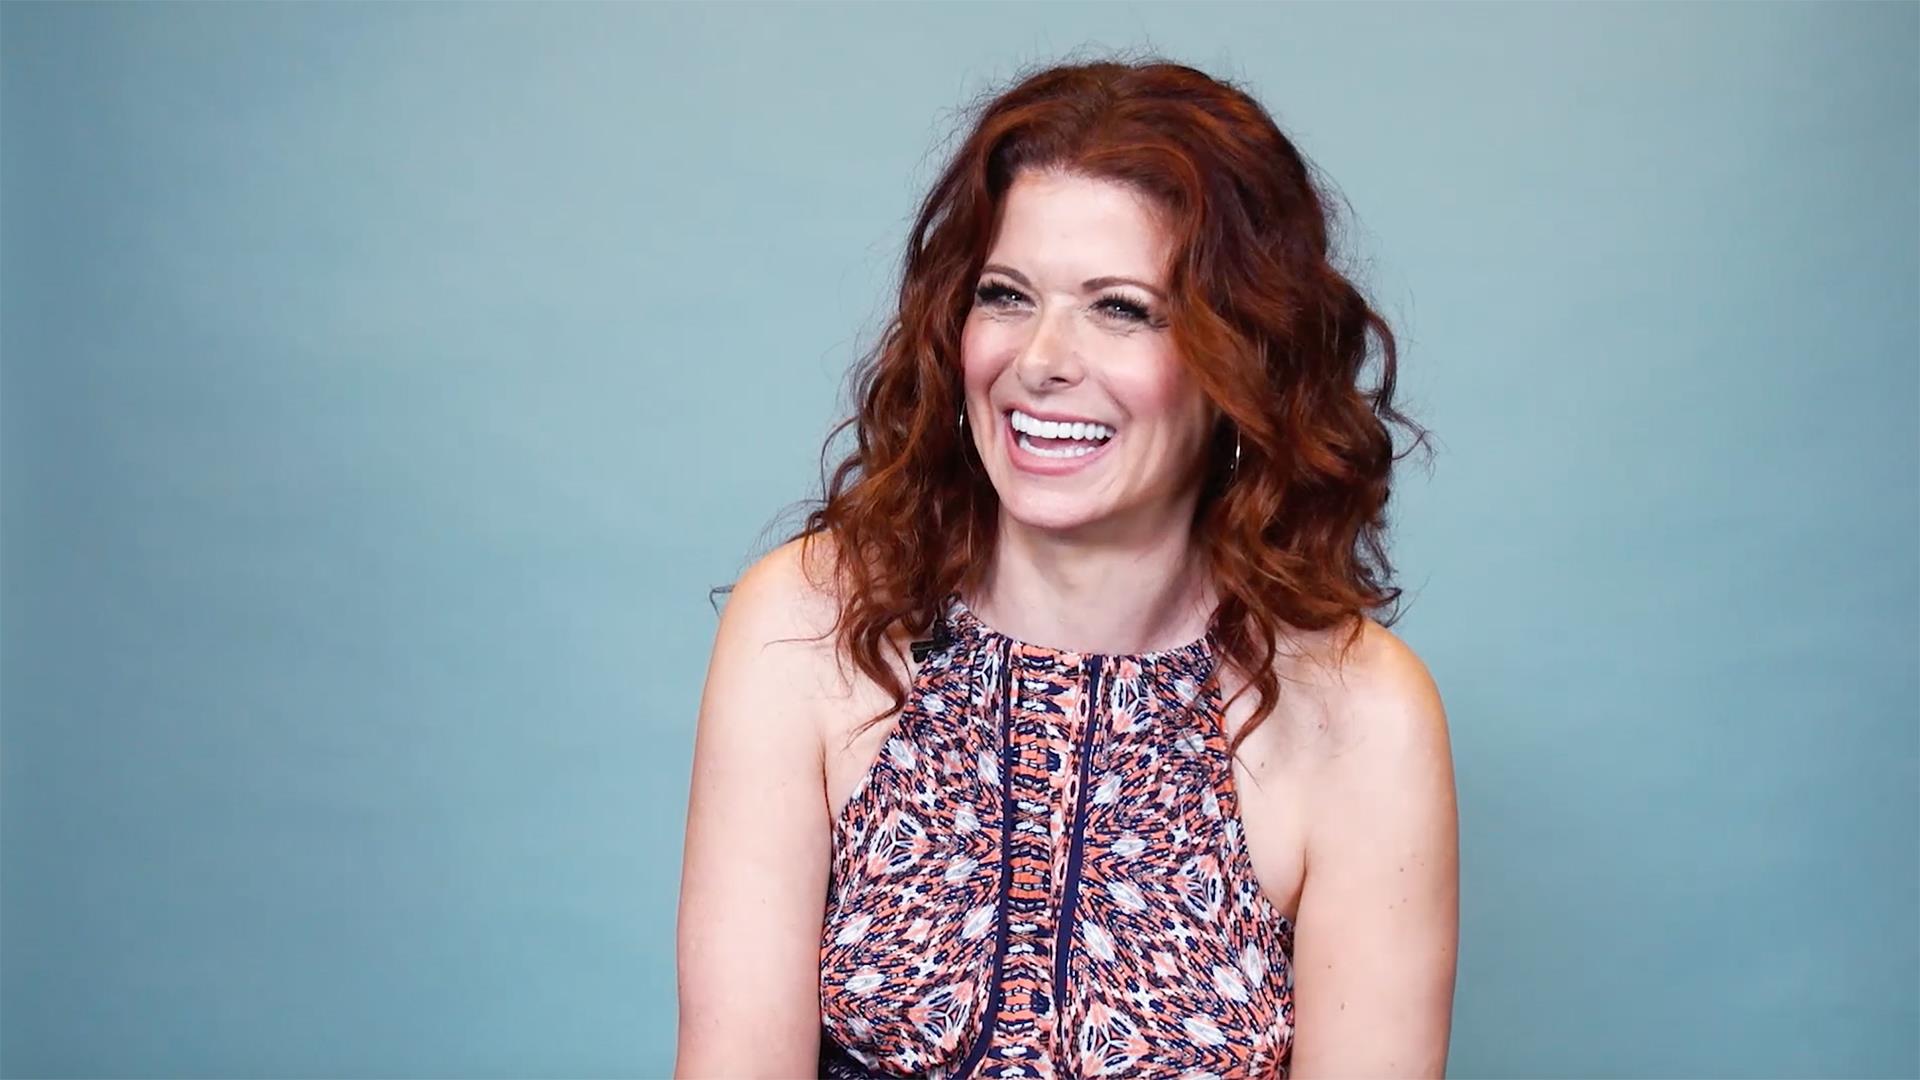 Debra Messing on her curly, red hair, sexism in Hollywood and 'Will & Grace'